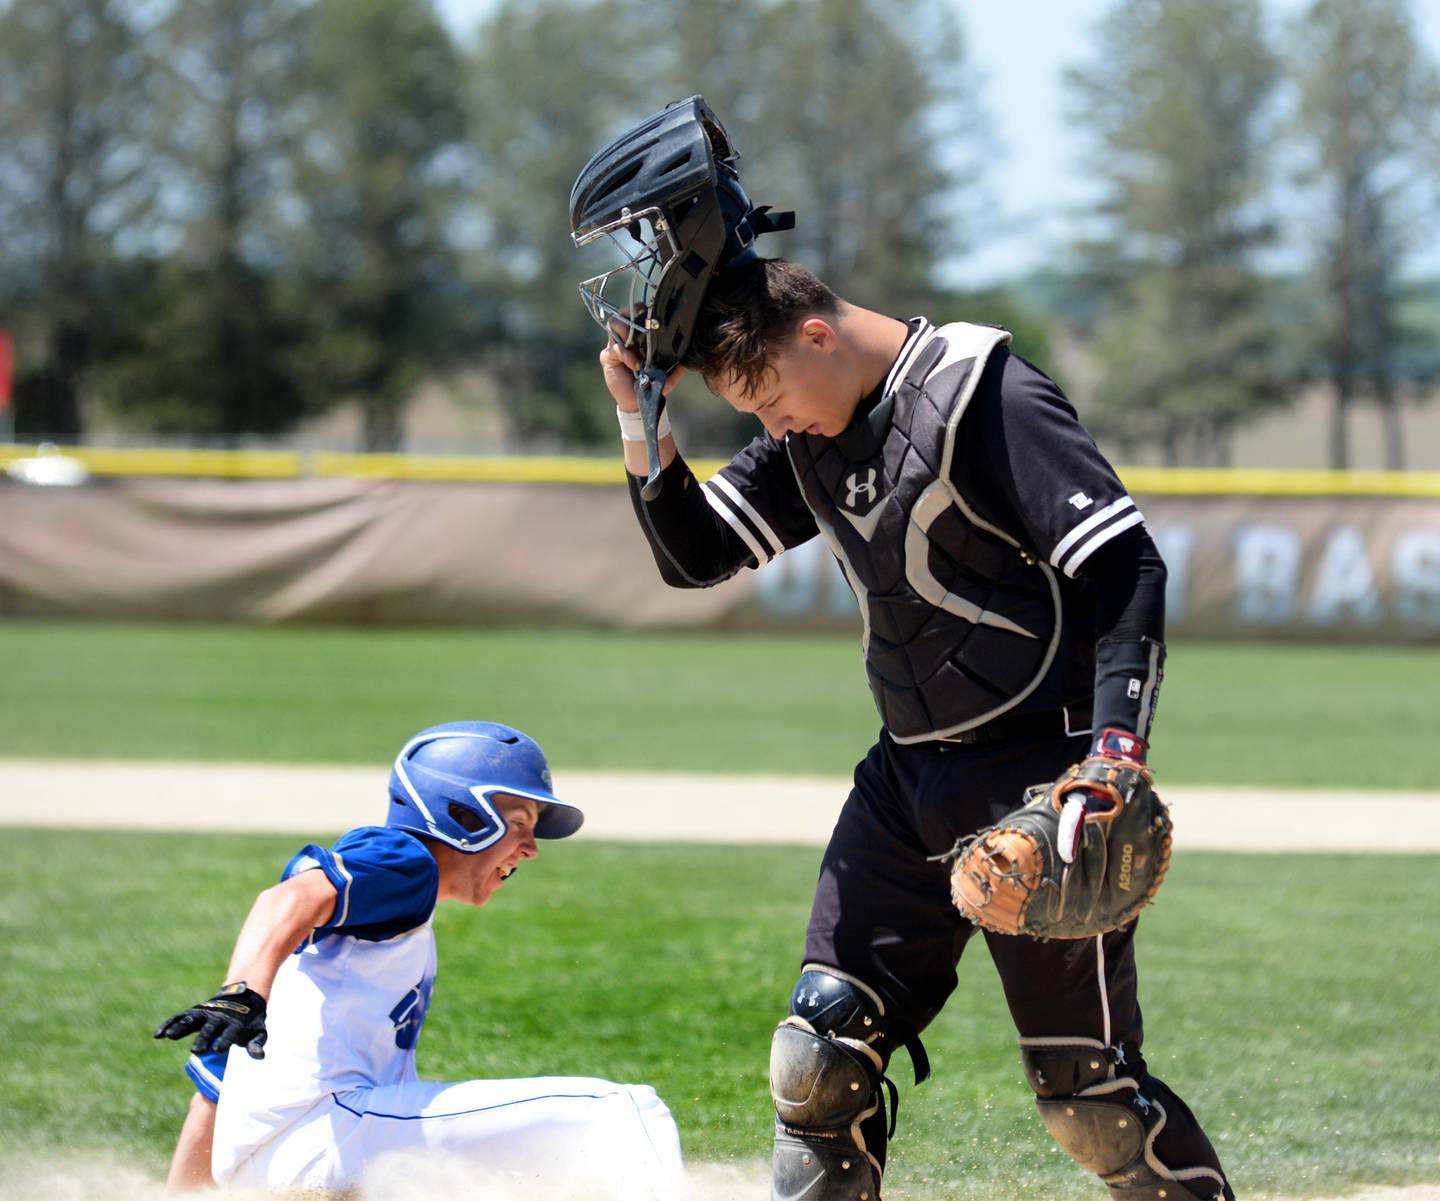 Rock Falls catcher Isaiah Kobbenman reacts as a Rockford Christian plater scores the winning run in the bottom of the eighth inning during the championship game at the 2A Oregon Regional on Saturday, May 21. The Rockets lost the game 5-4.